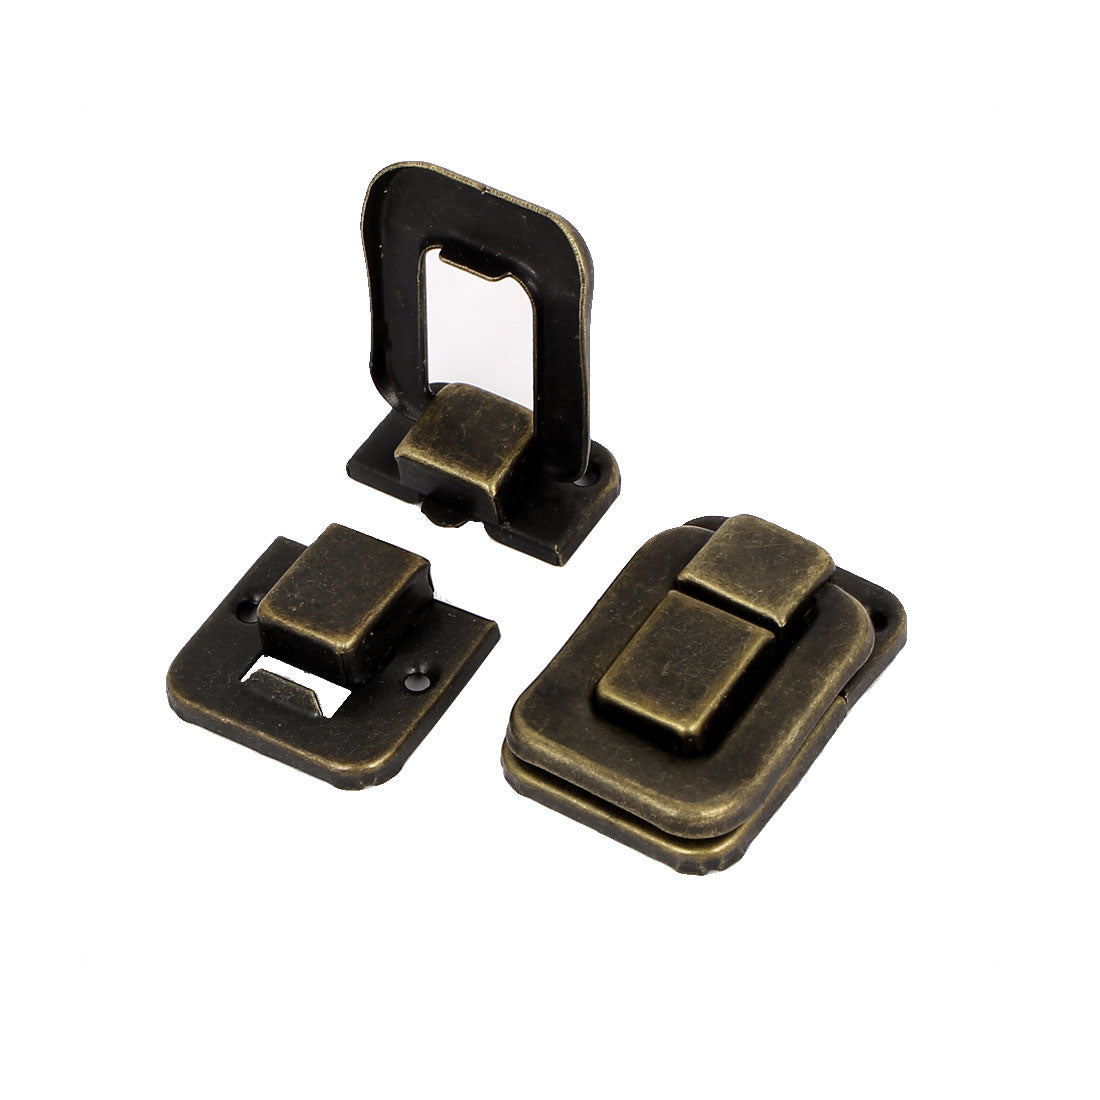 uxcell Uxcell Bags Wooden Case Iron Box Toggle Latch Hasp Lock Bronze Tone 38mm Length 10pcs